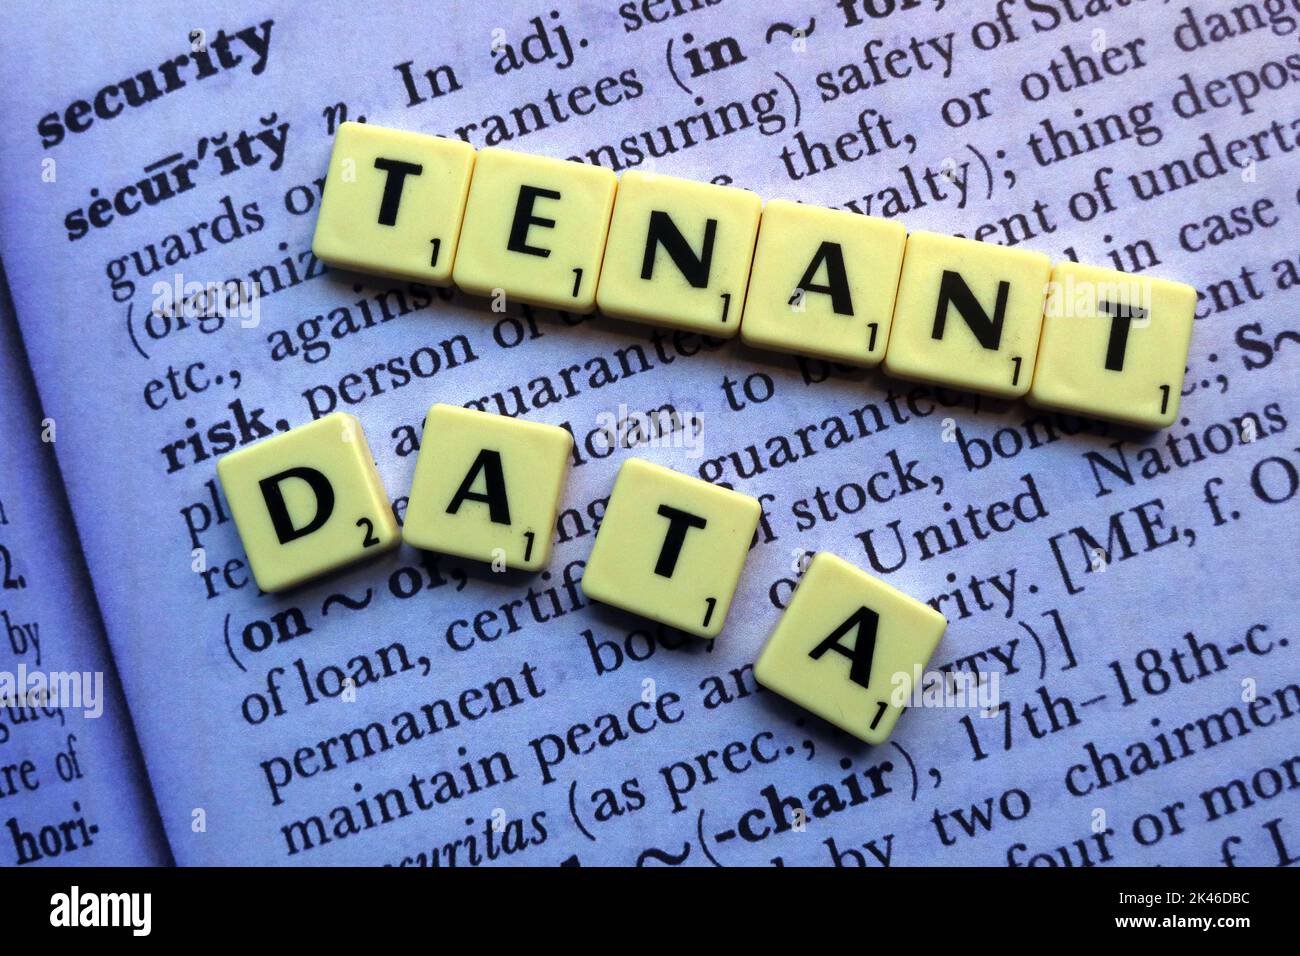 Tenant Data,spelled out in Scrabble letters, on the dictionary definition of security Stock Photo